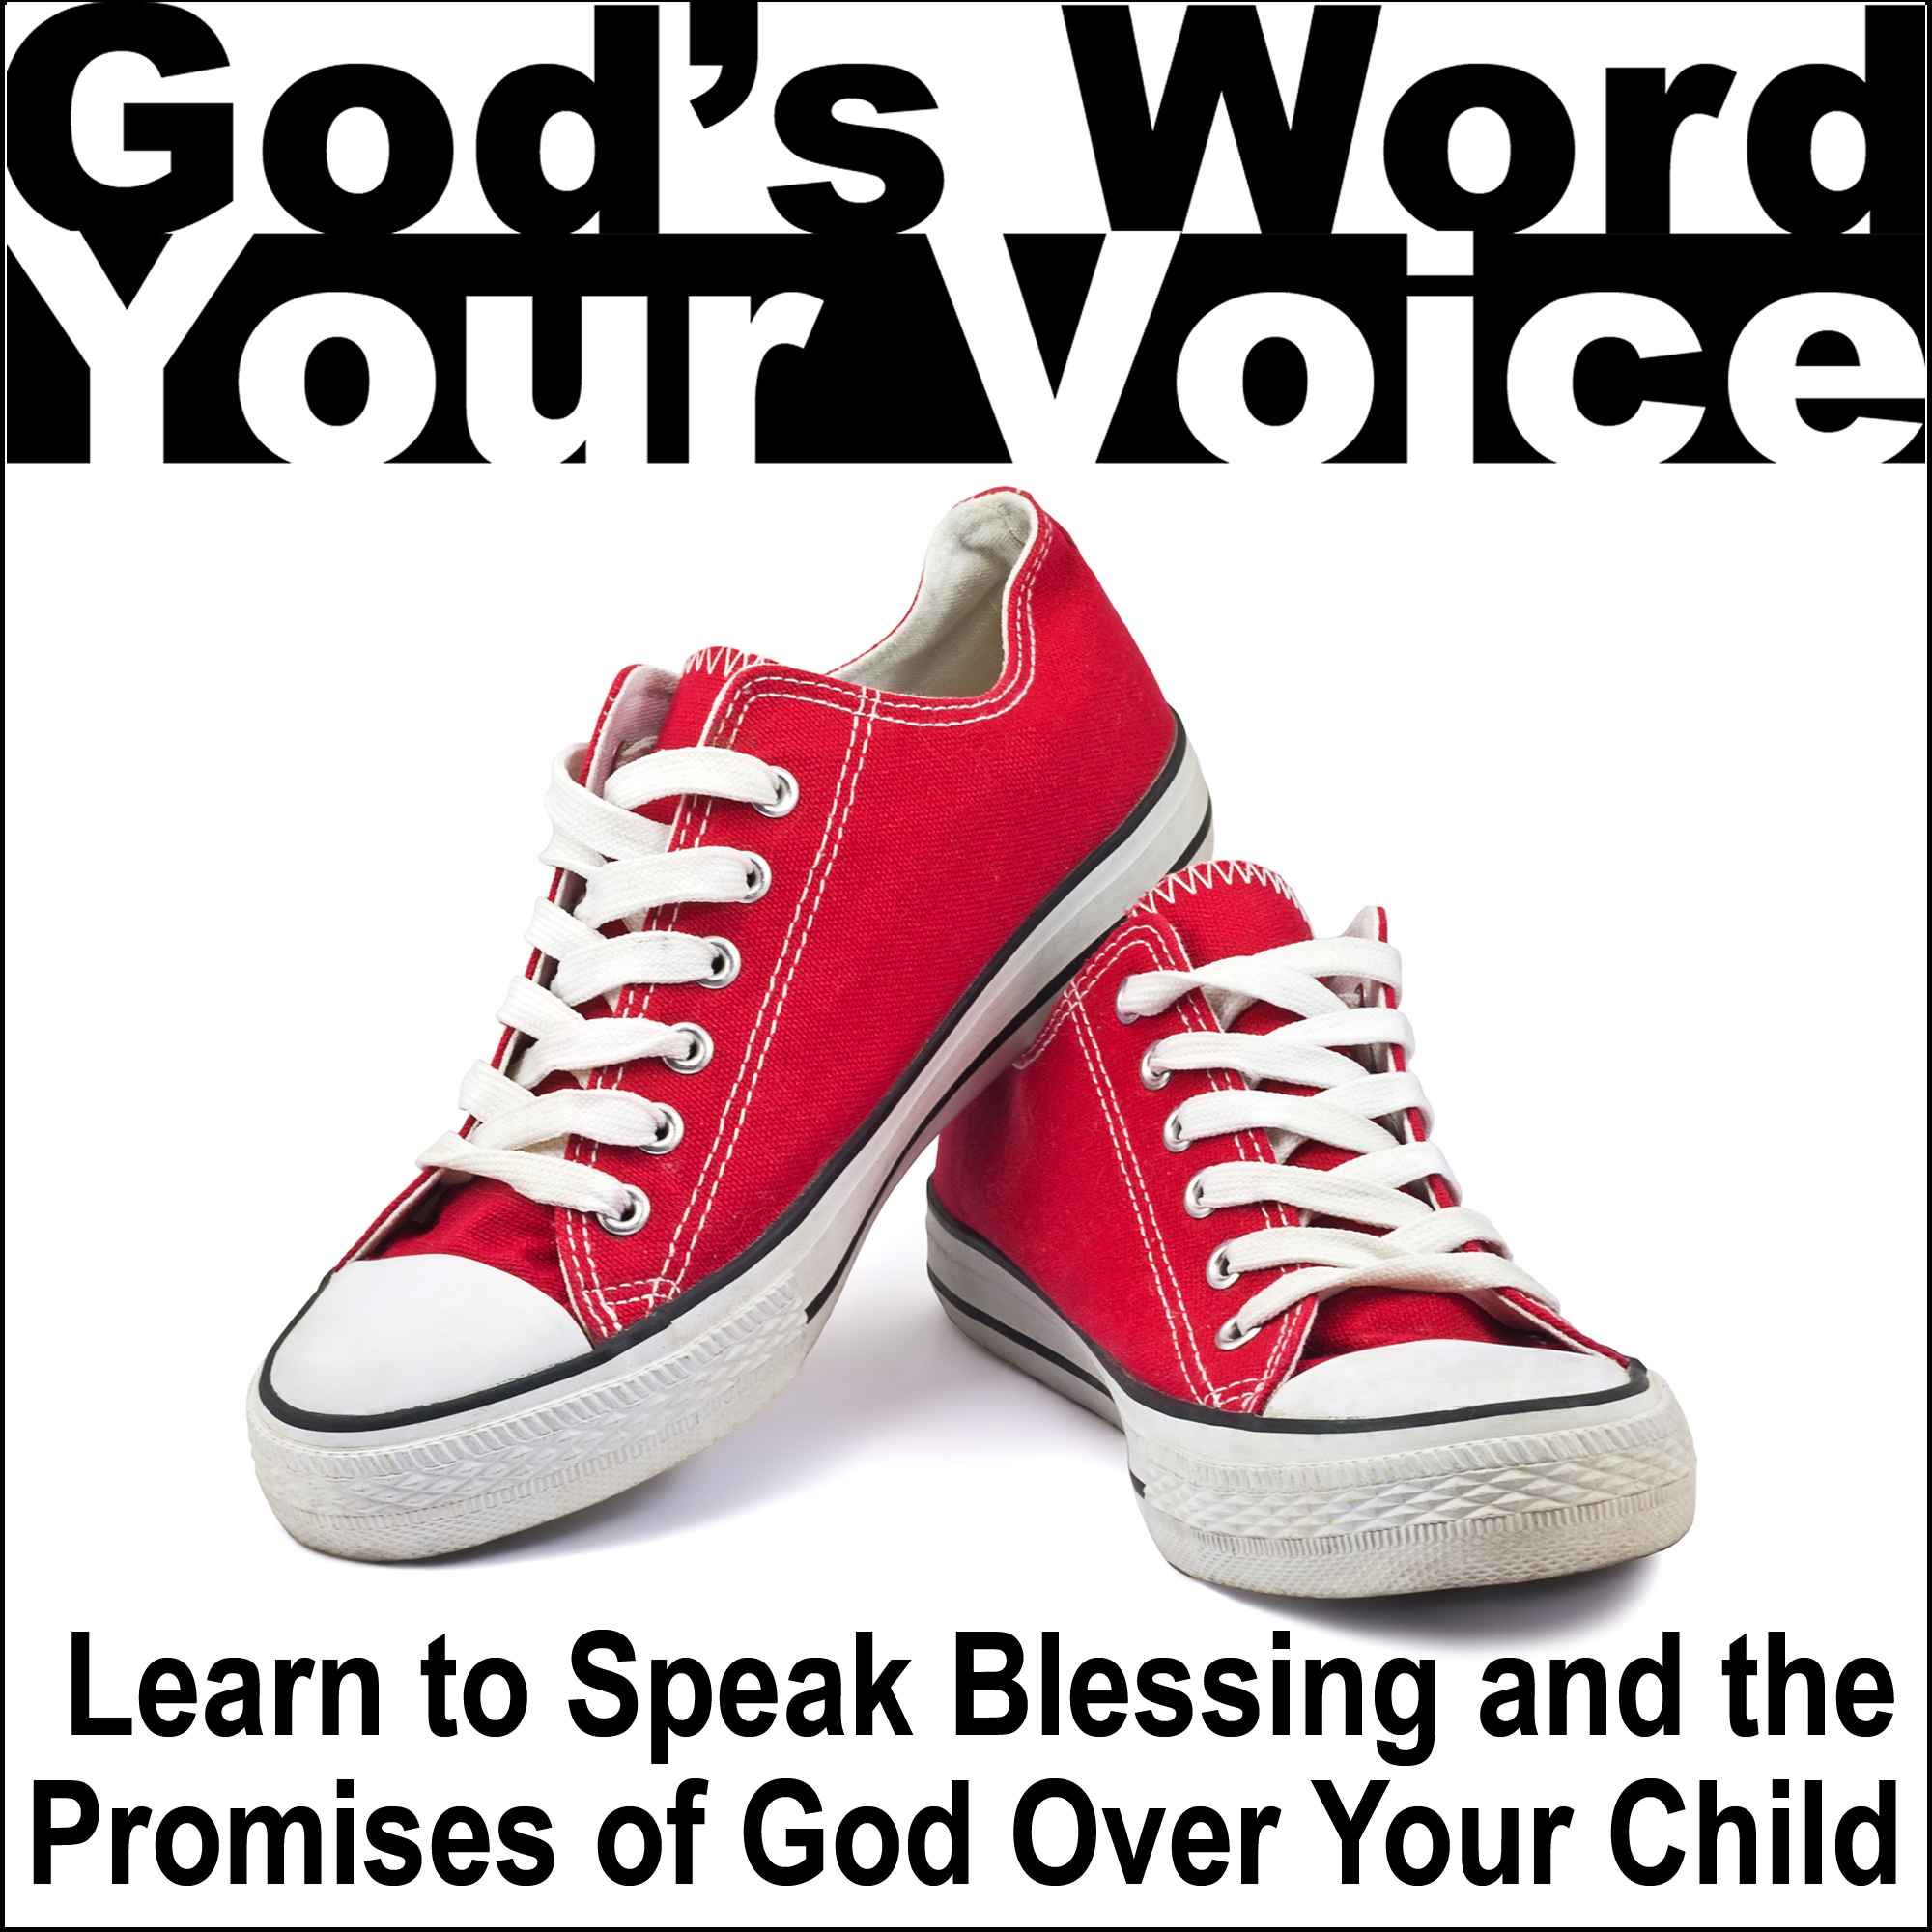 God's Word, Your Voice books available on Amazon.com